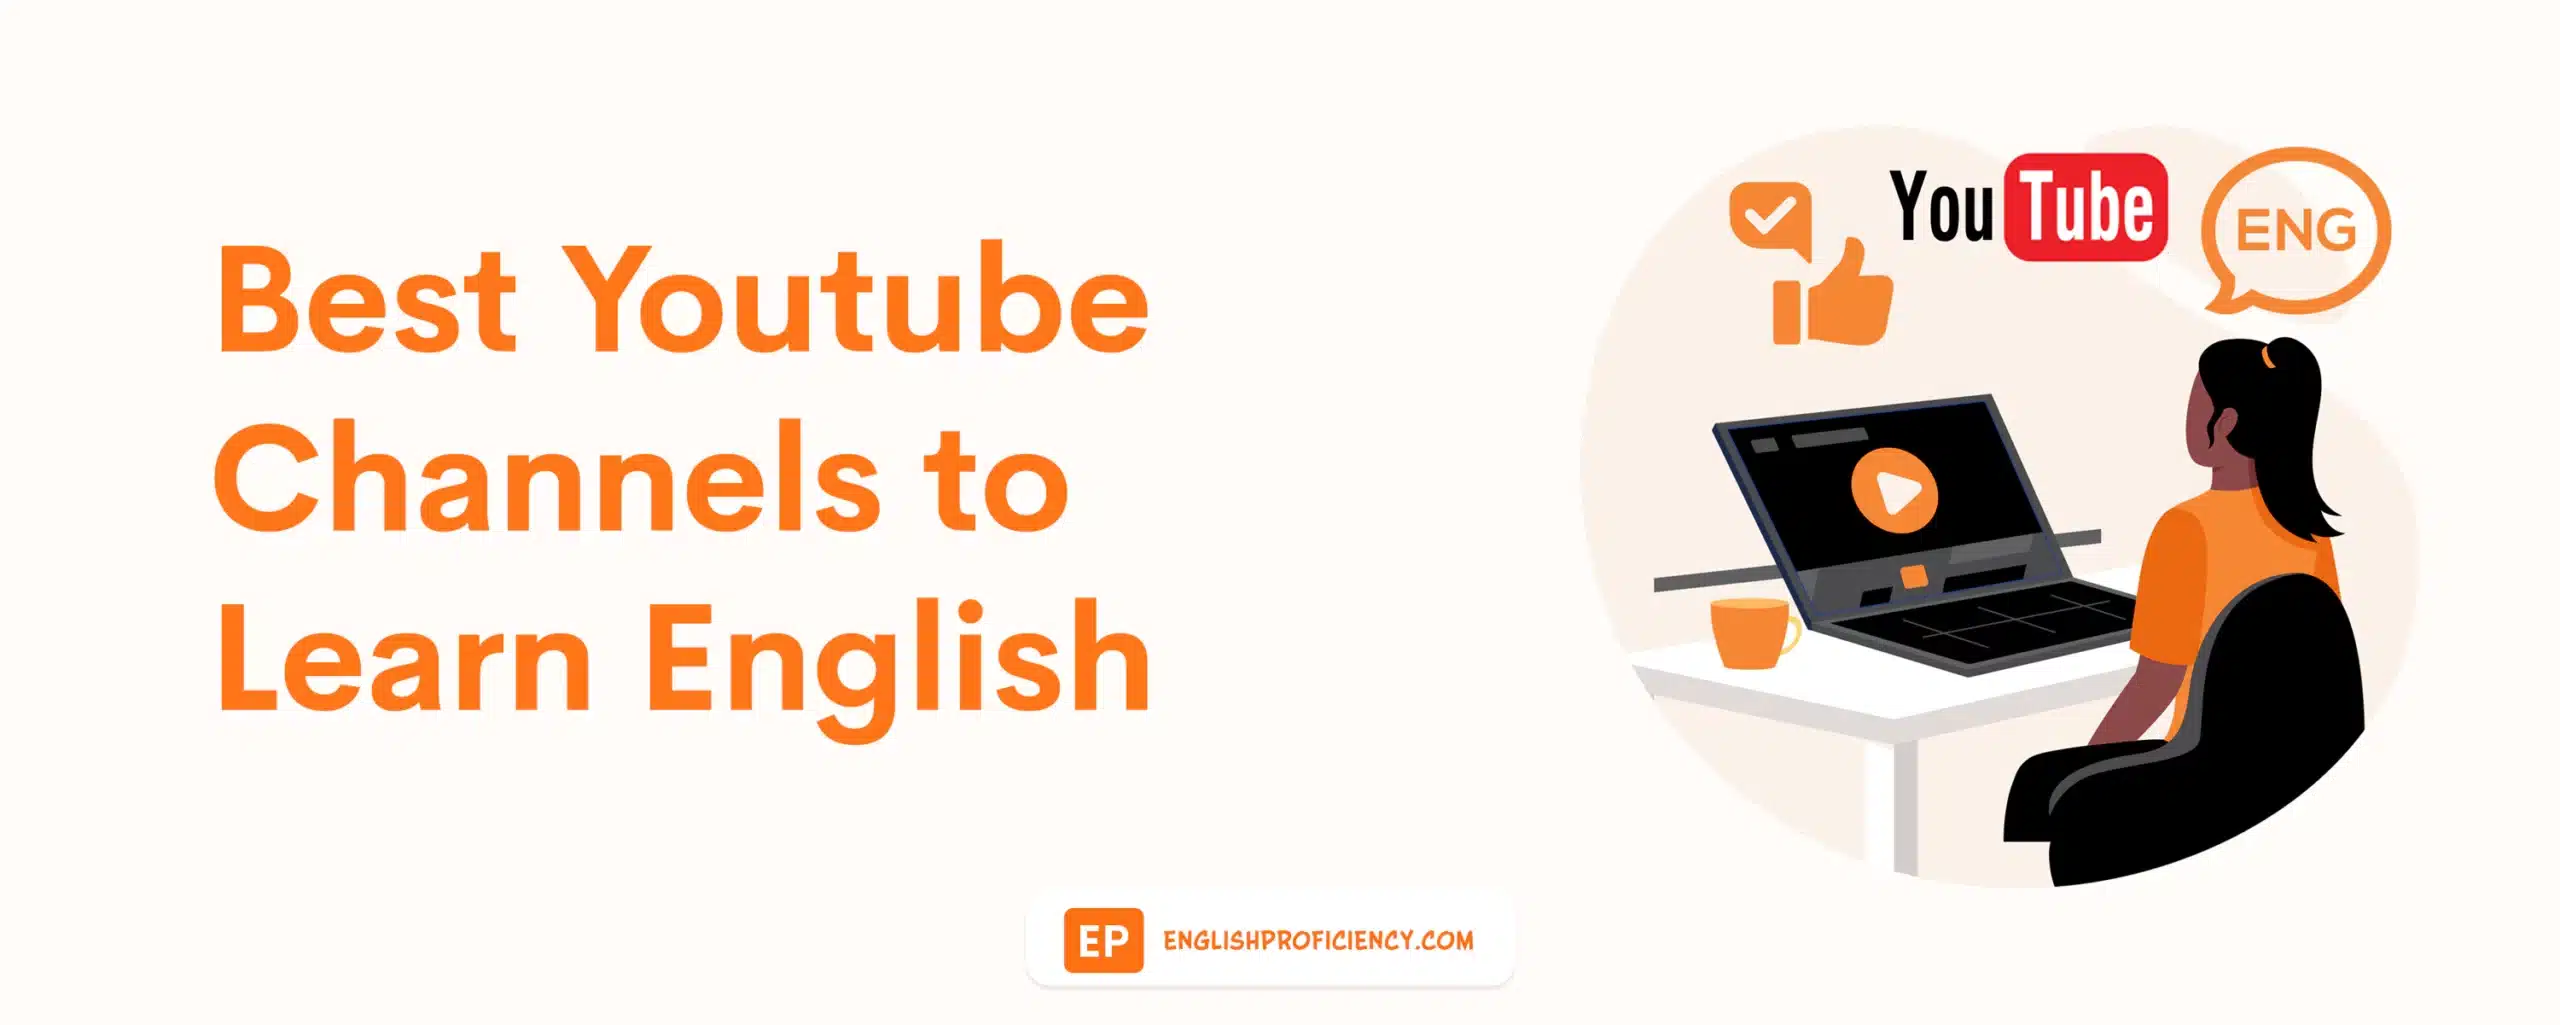 Best YouTube Channels to Learn English